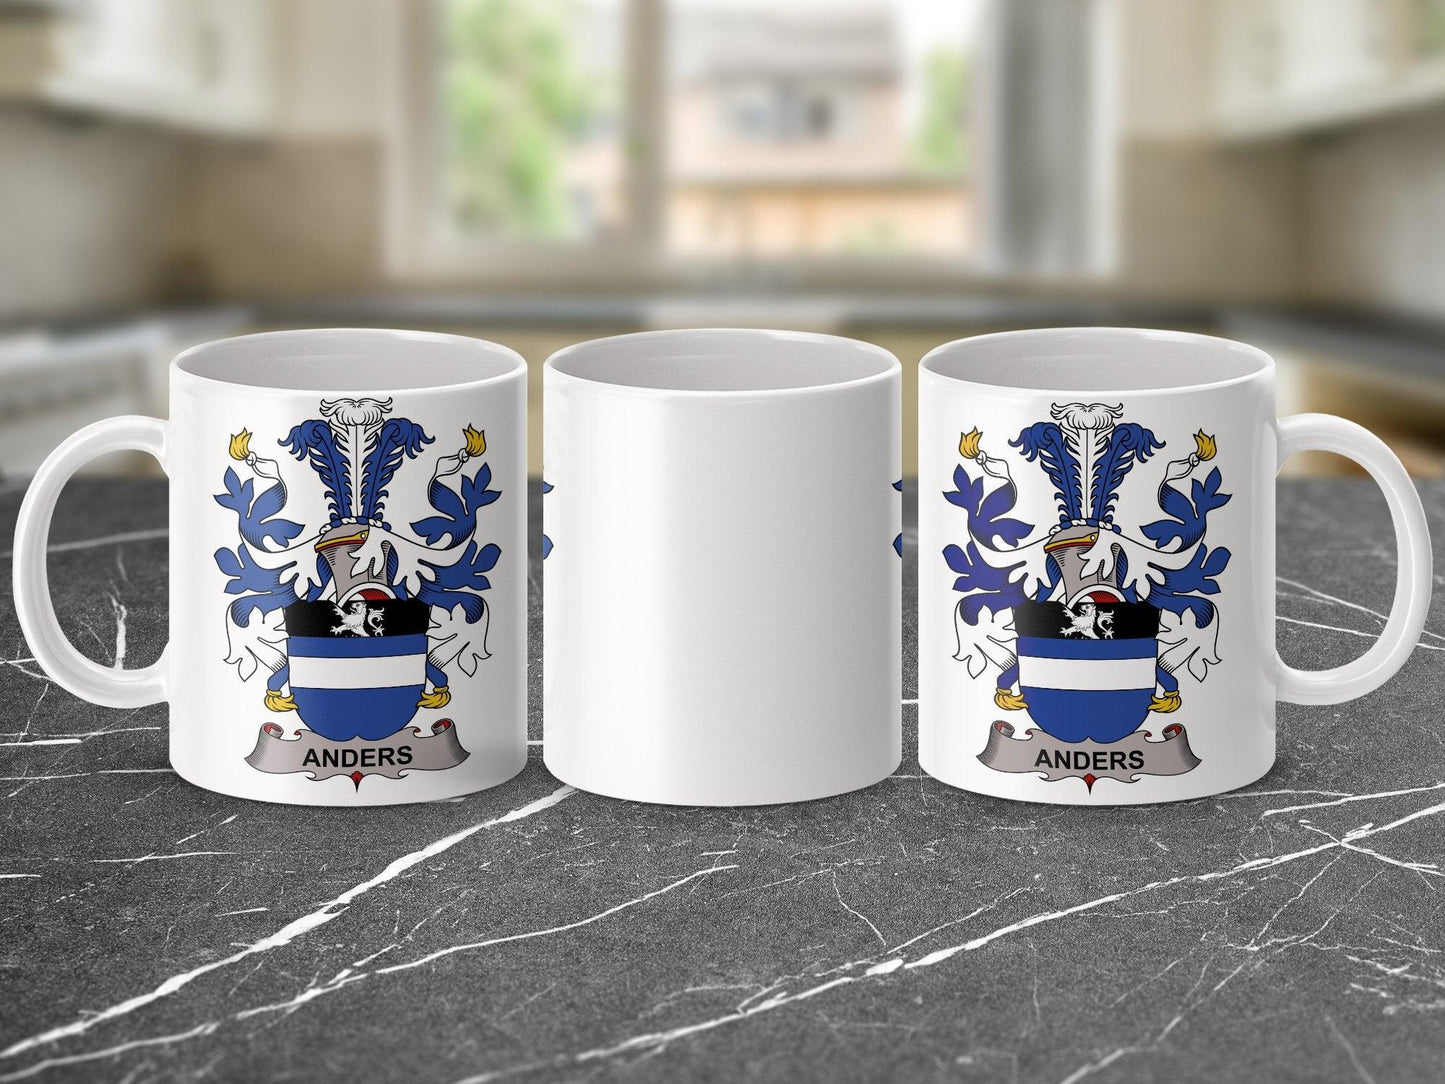 Anders Family Crest Mug, Danish Surname Coat of Arms Coffee Cup